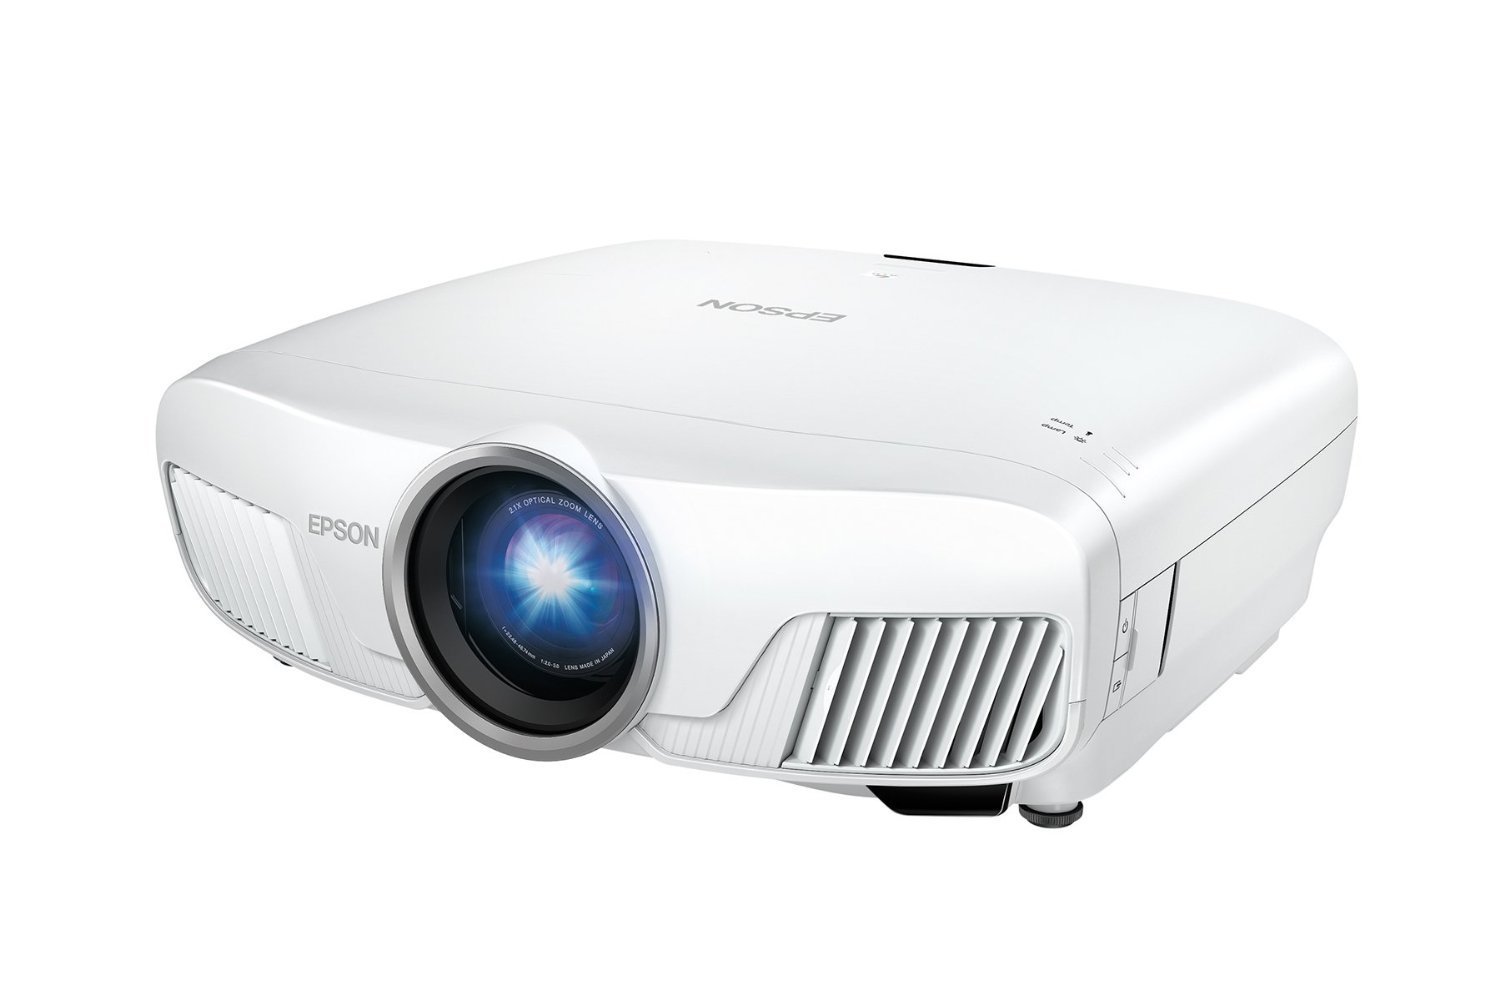 Epson Home Cinema 5040UB 1080p 3D 3LCD Home Theater Projector with 4K Enhancement, HDR and Wide Color Gamut